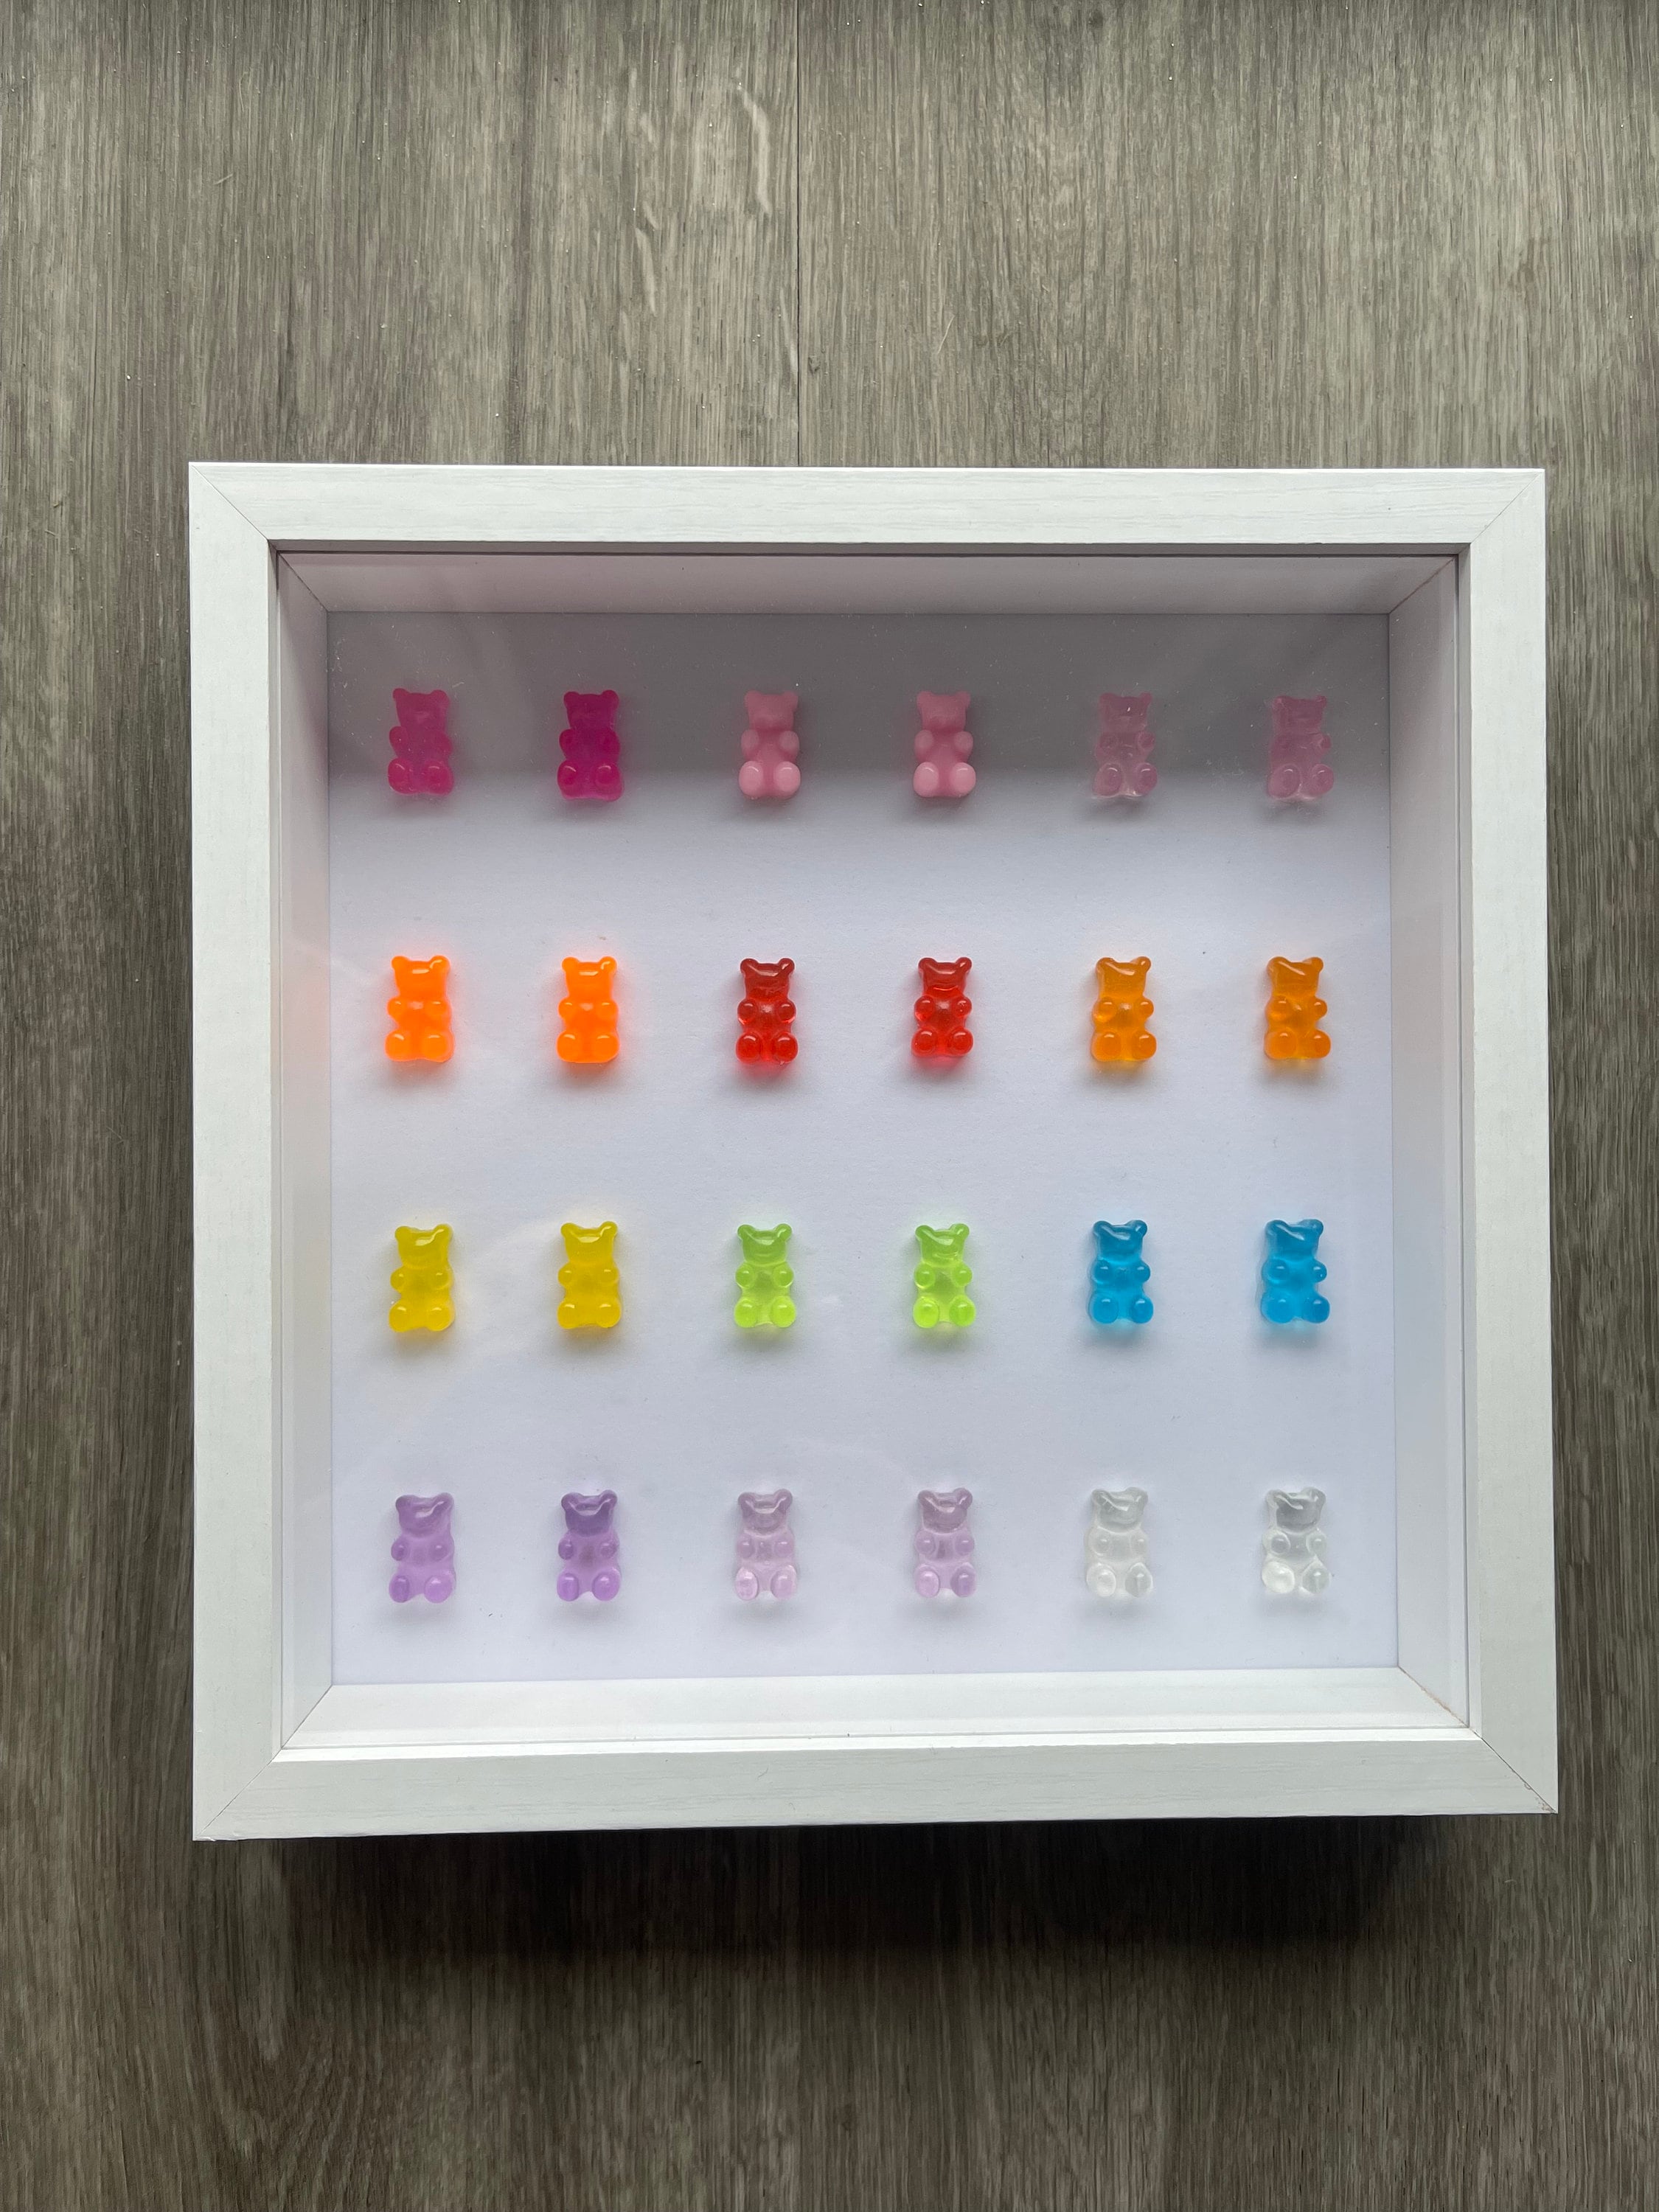 Acrylic Shadow Box, Transparent Shadow Box Frame,Shadow Boxes Display Cases for Wall Mount and Tabletop, Inner Depth 1.77 in